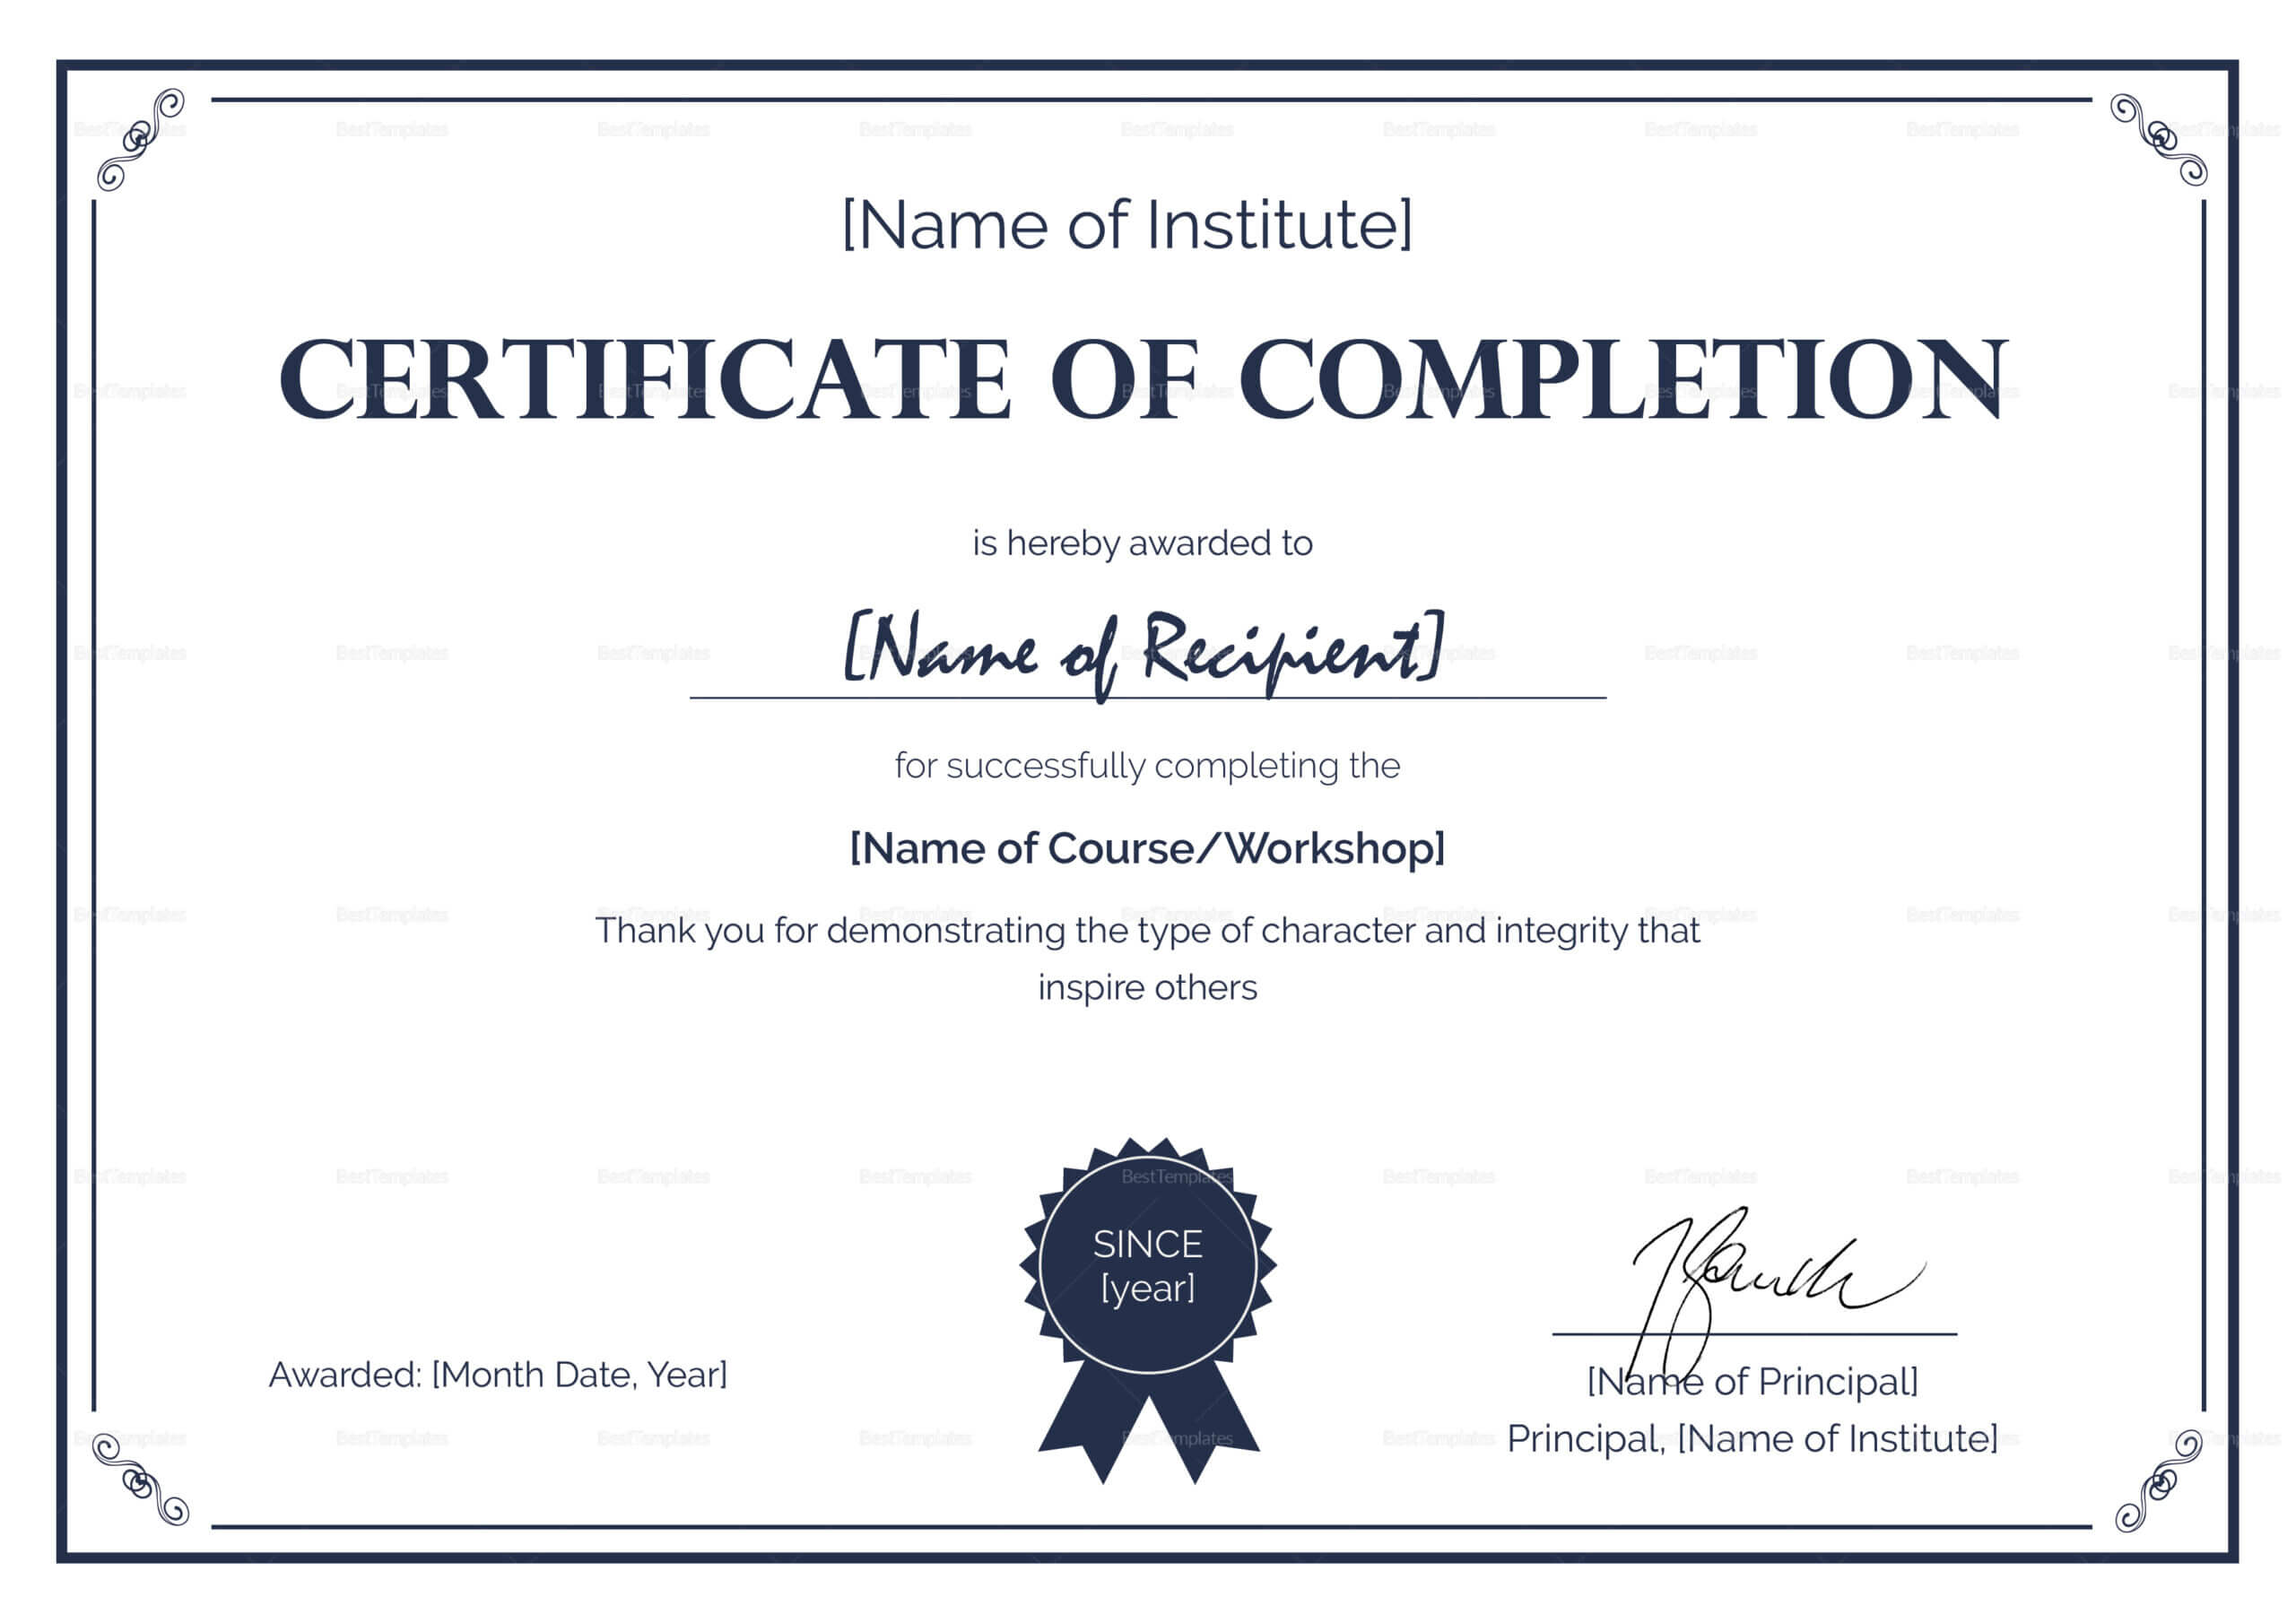 007 Certificate Of Completion Template Ideas Fantastic With Regard To Certification Of Completion Template